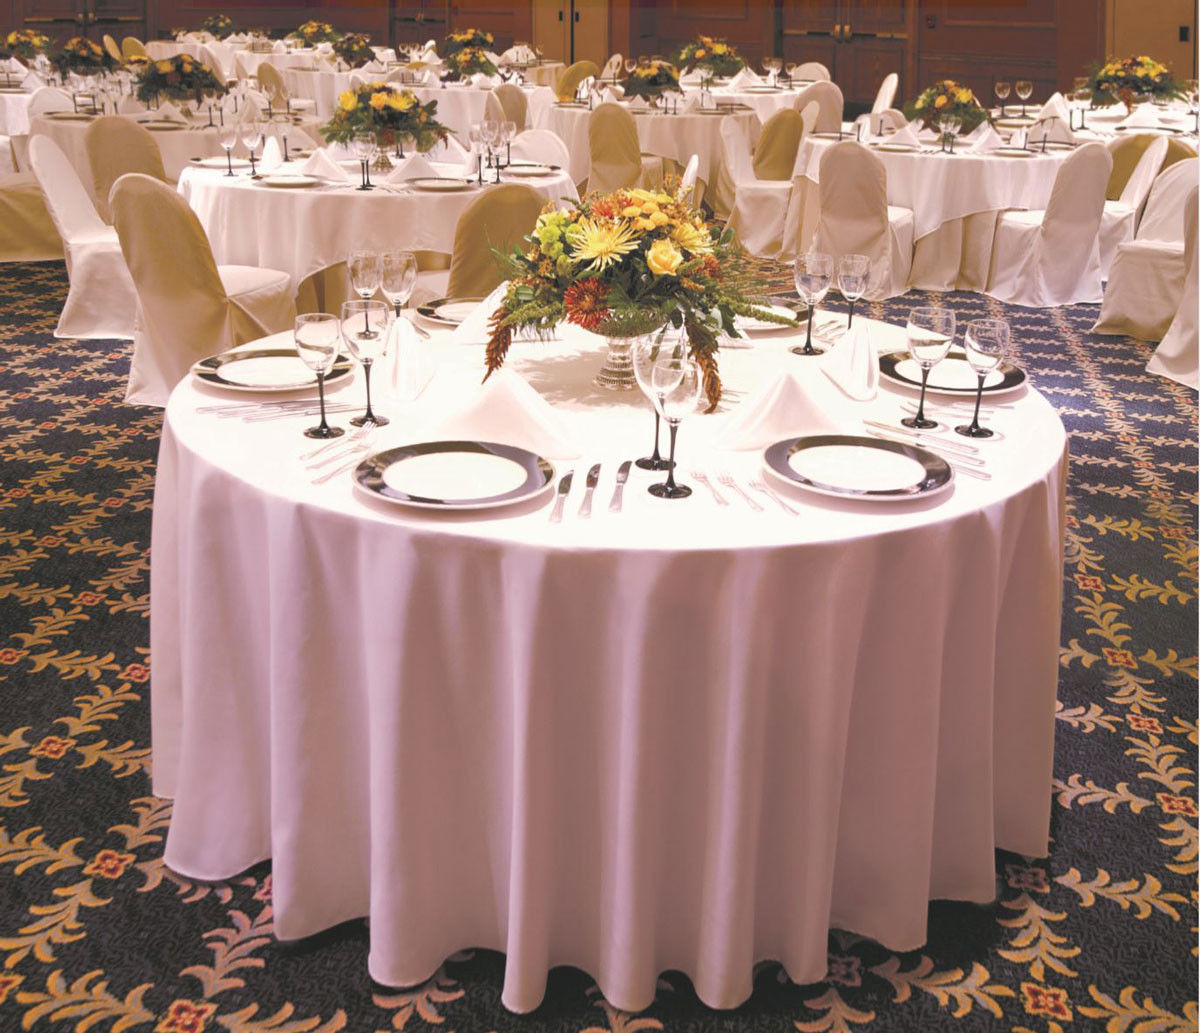 What sizes can one find for the 132 inch round tablecloth in the Seamless Horizon range?